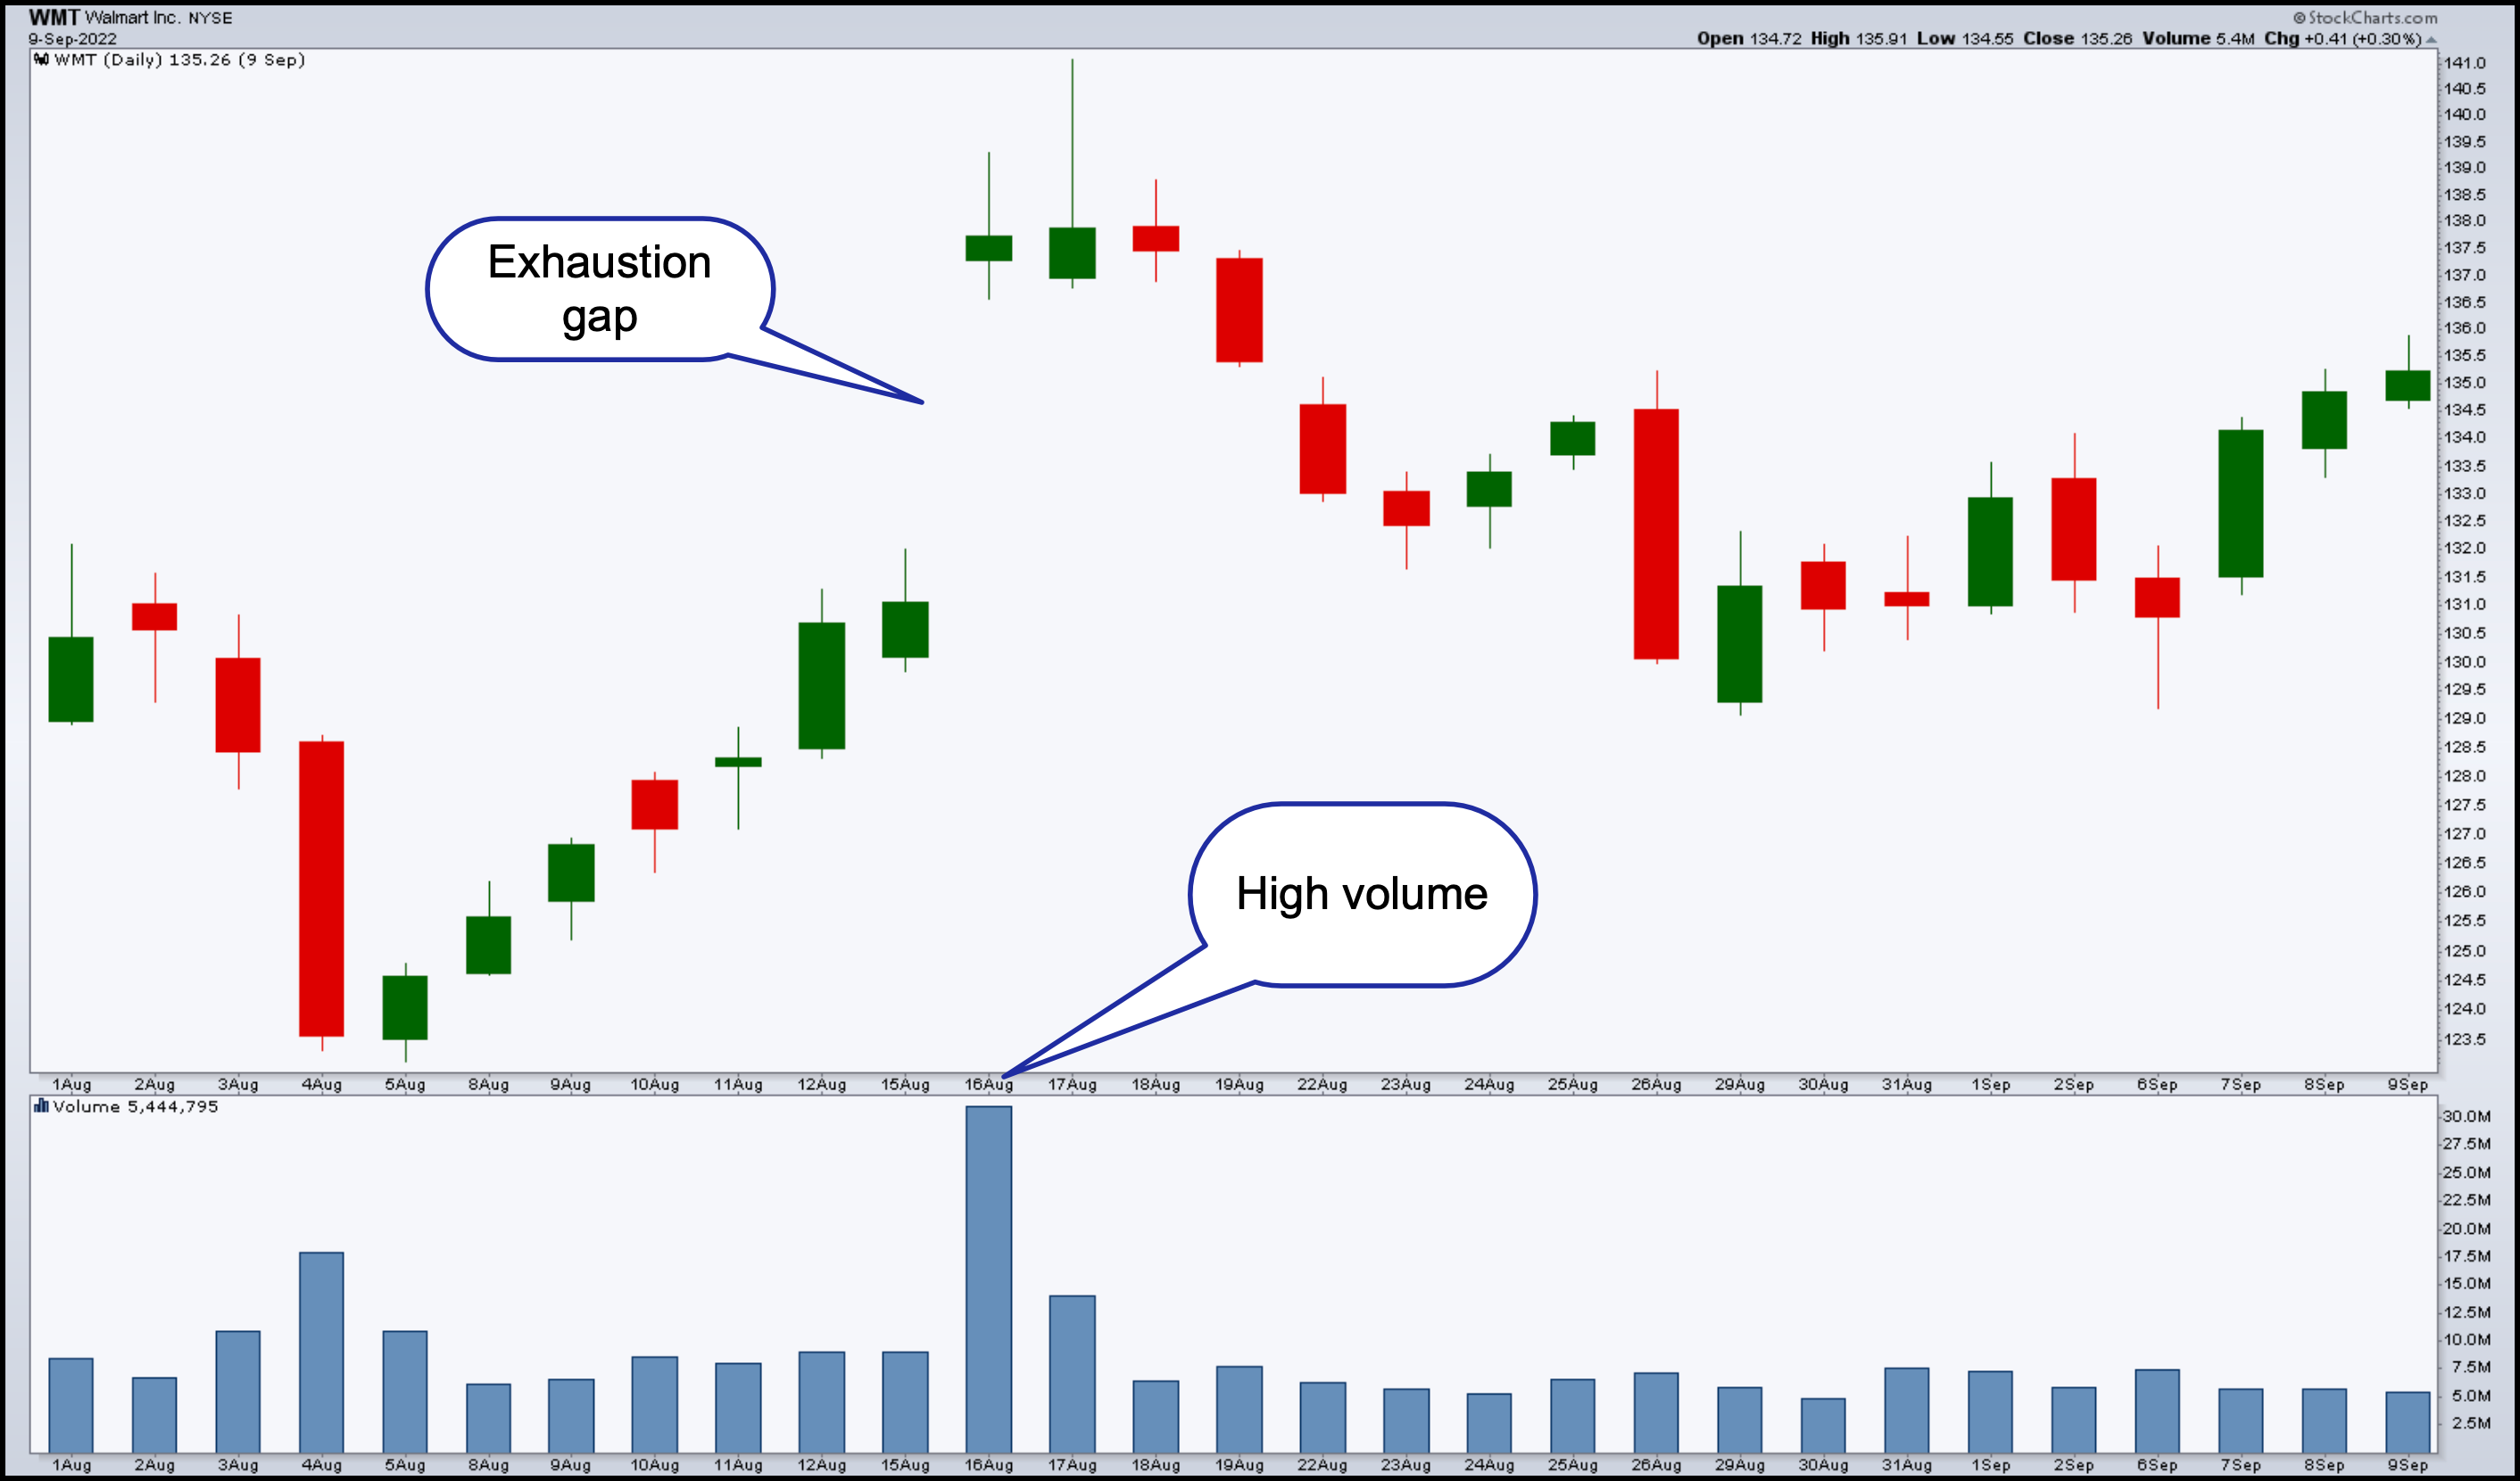 price chart from StockCharts showing exhaustion gap